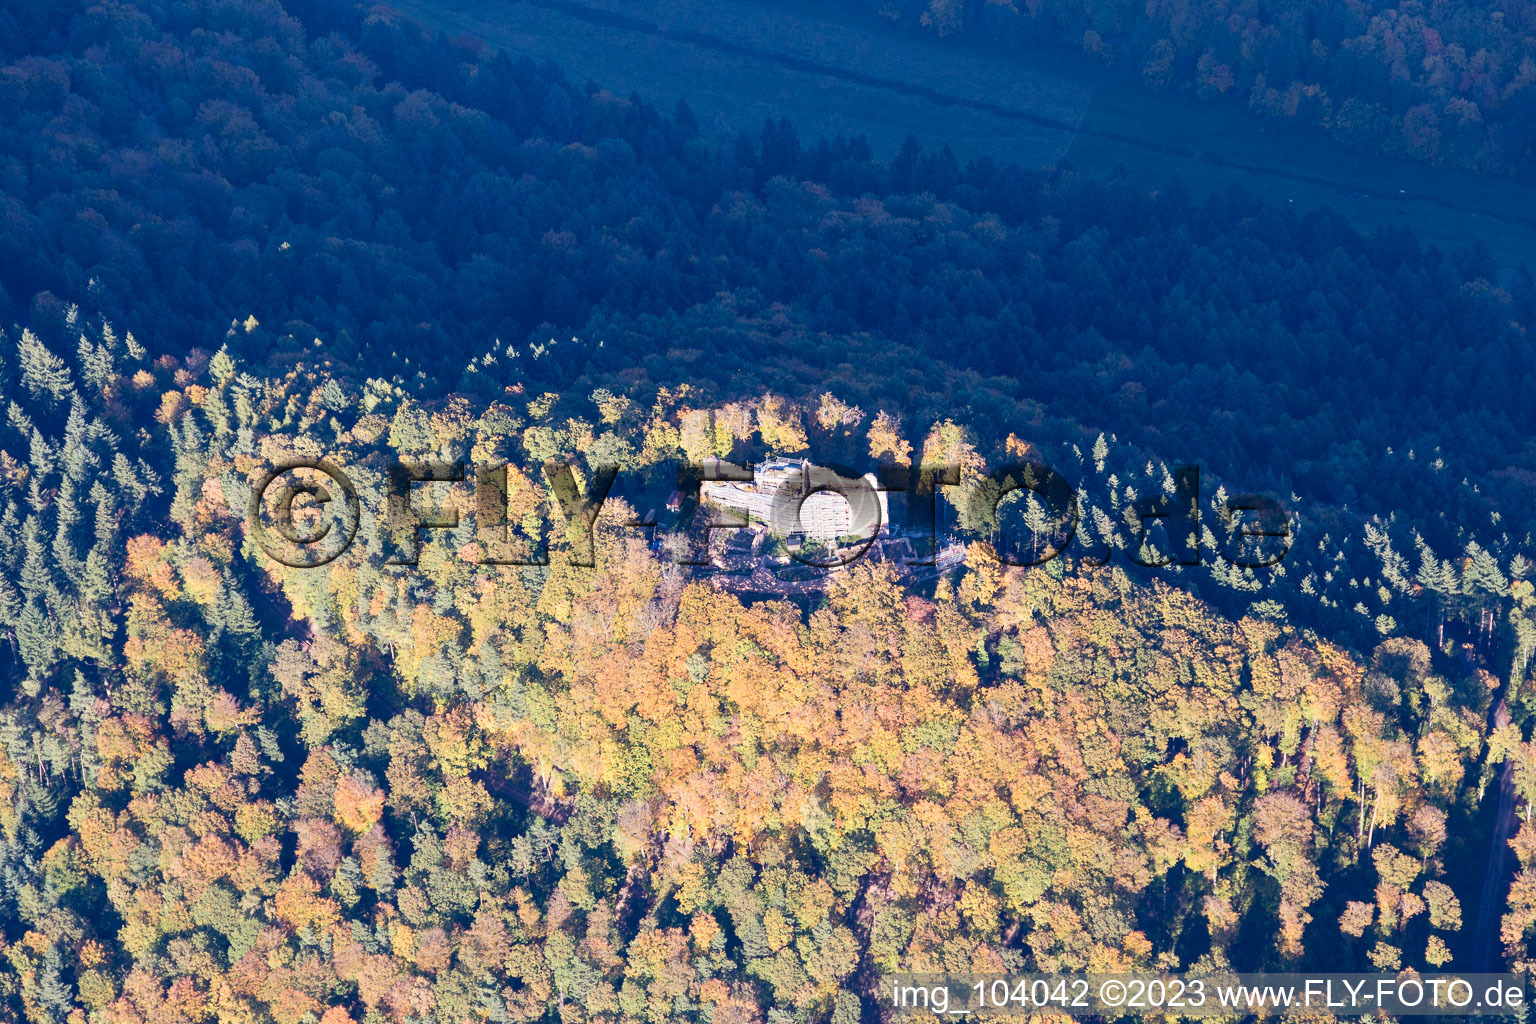 Ramberg in the state Rhineland-Palatinate, Germany seen from above